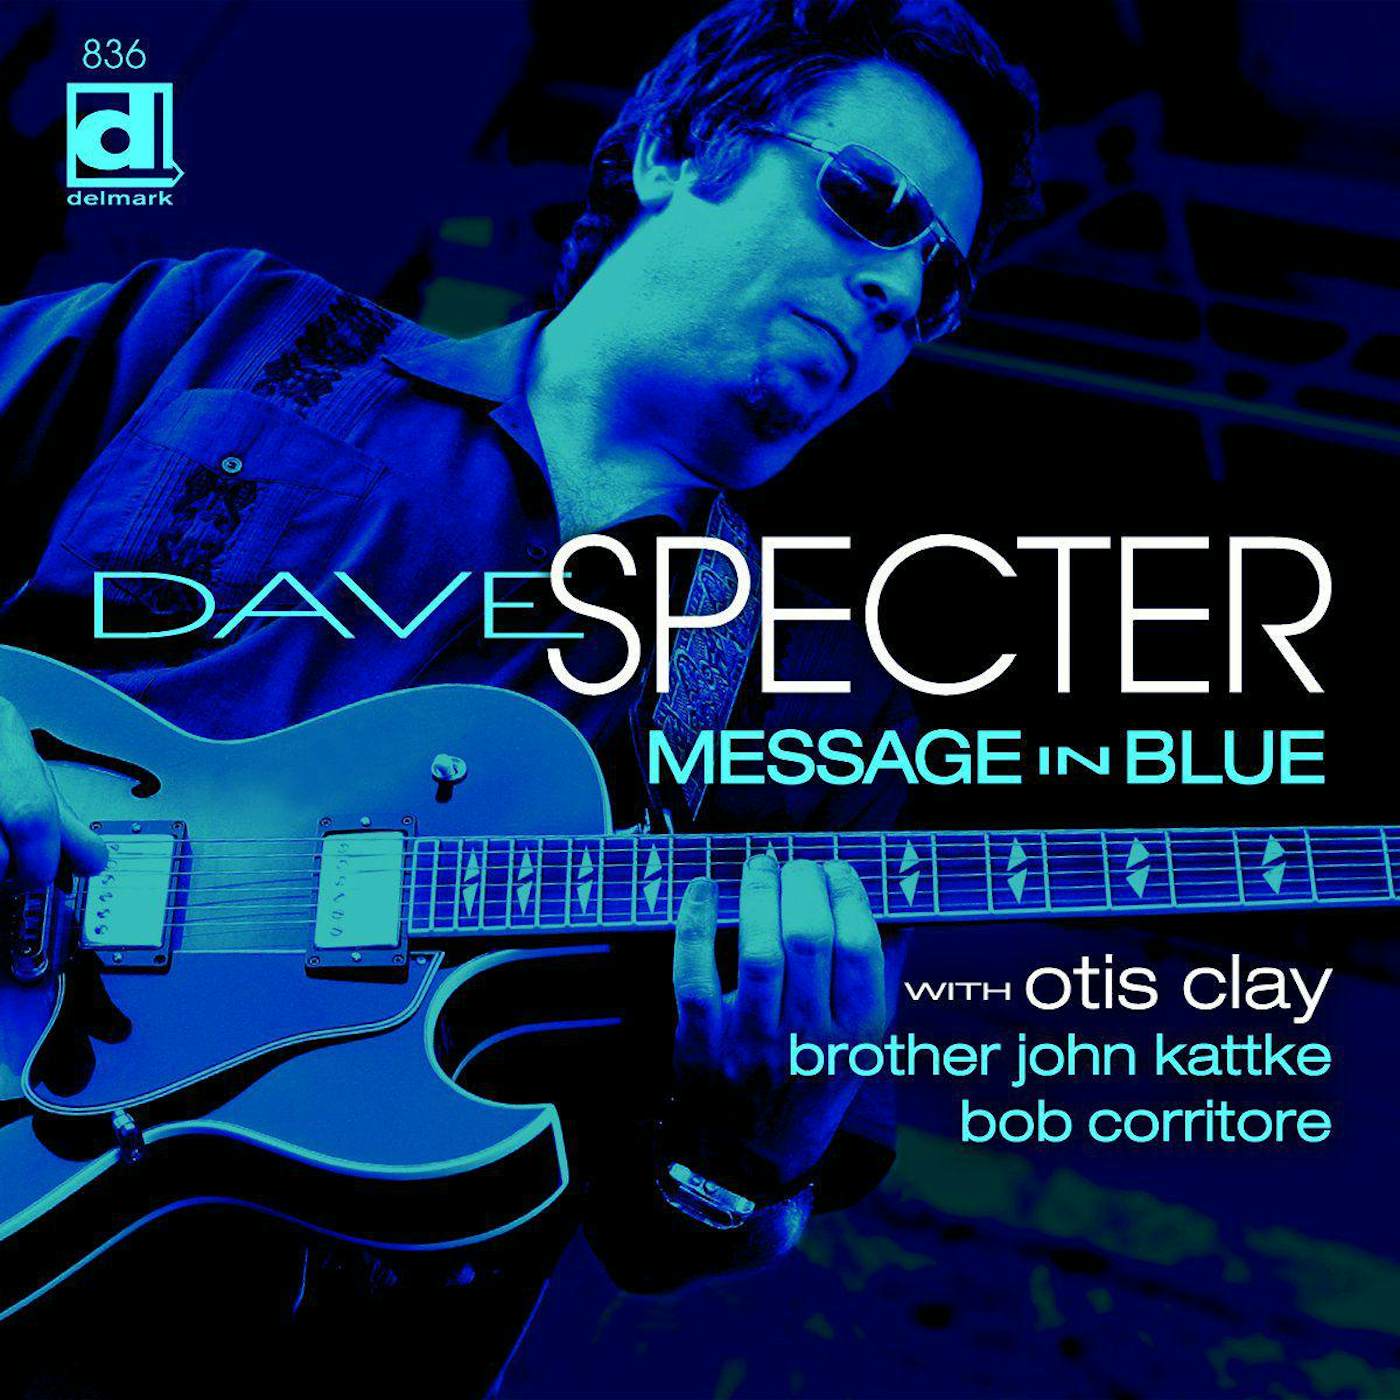 Dave Specter Message in Blue Vinyl Record